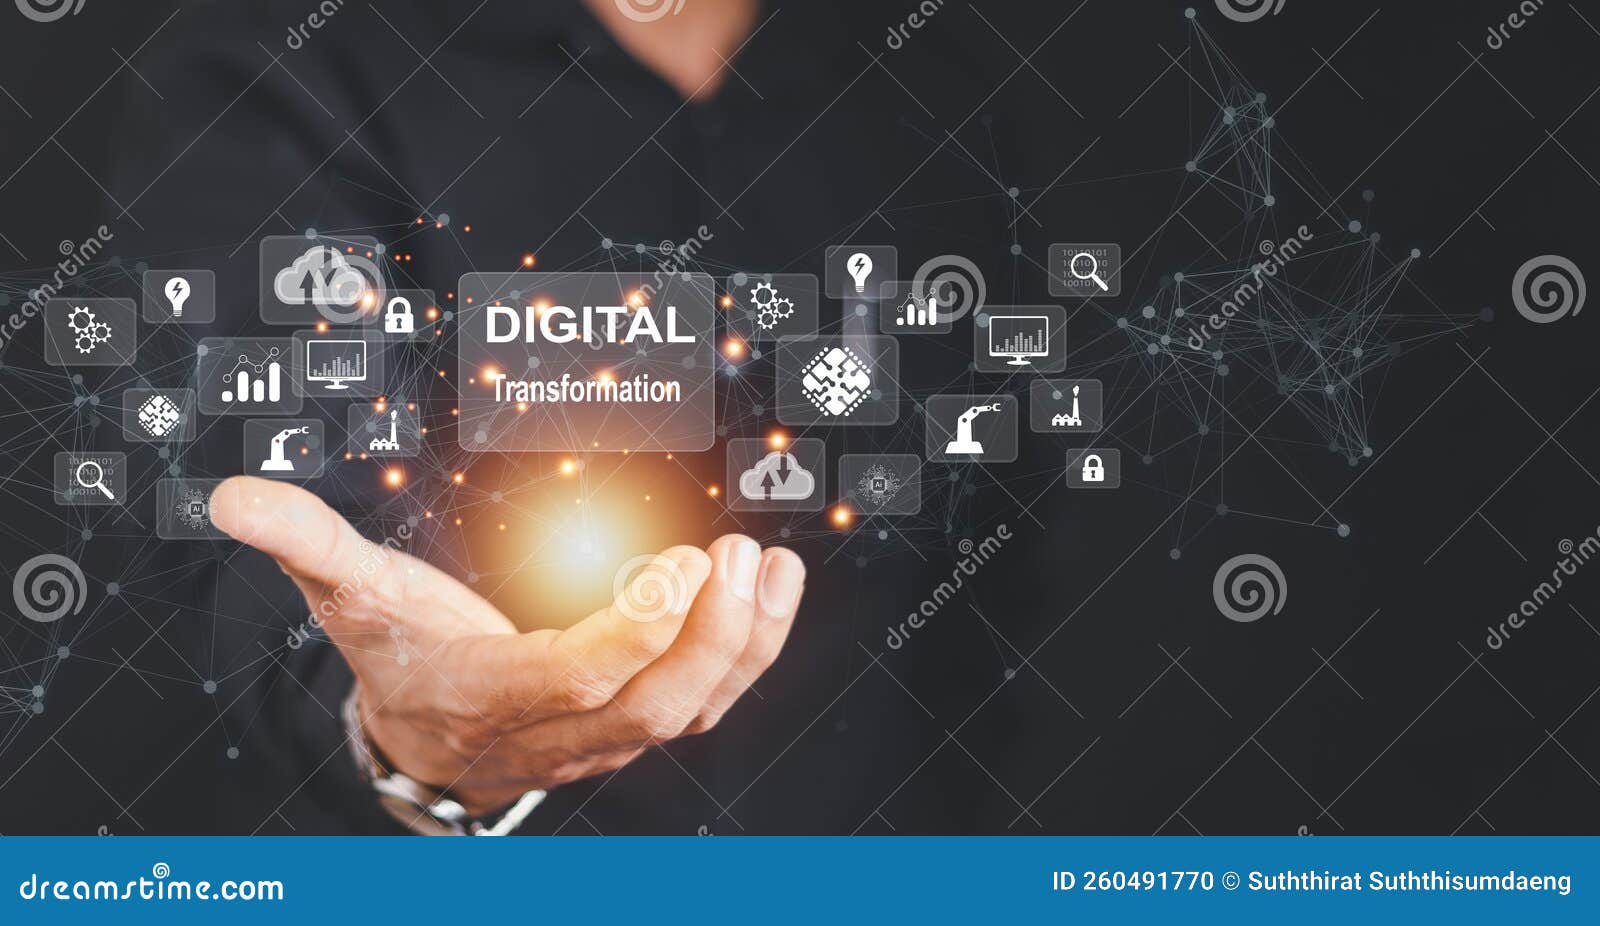 digital transformation technology strategy, digitization and digitalization of business processes and data, optimize and automate